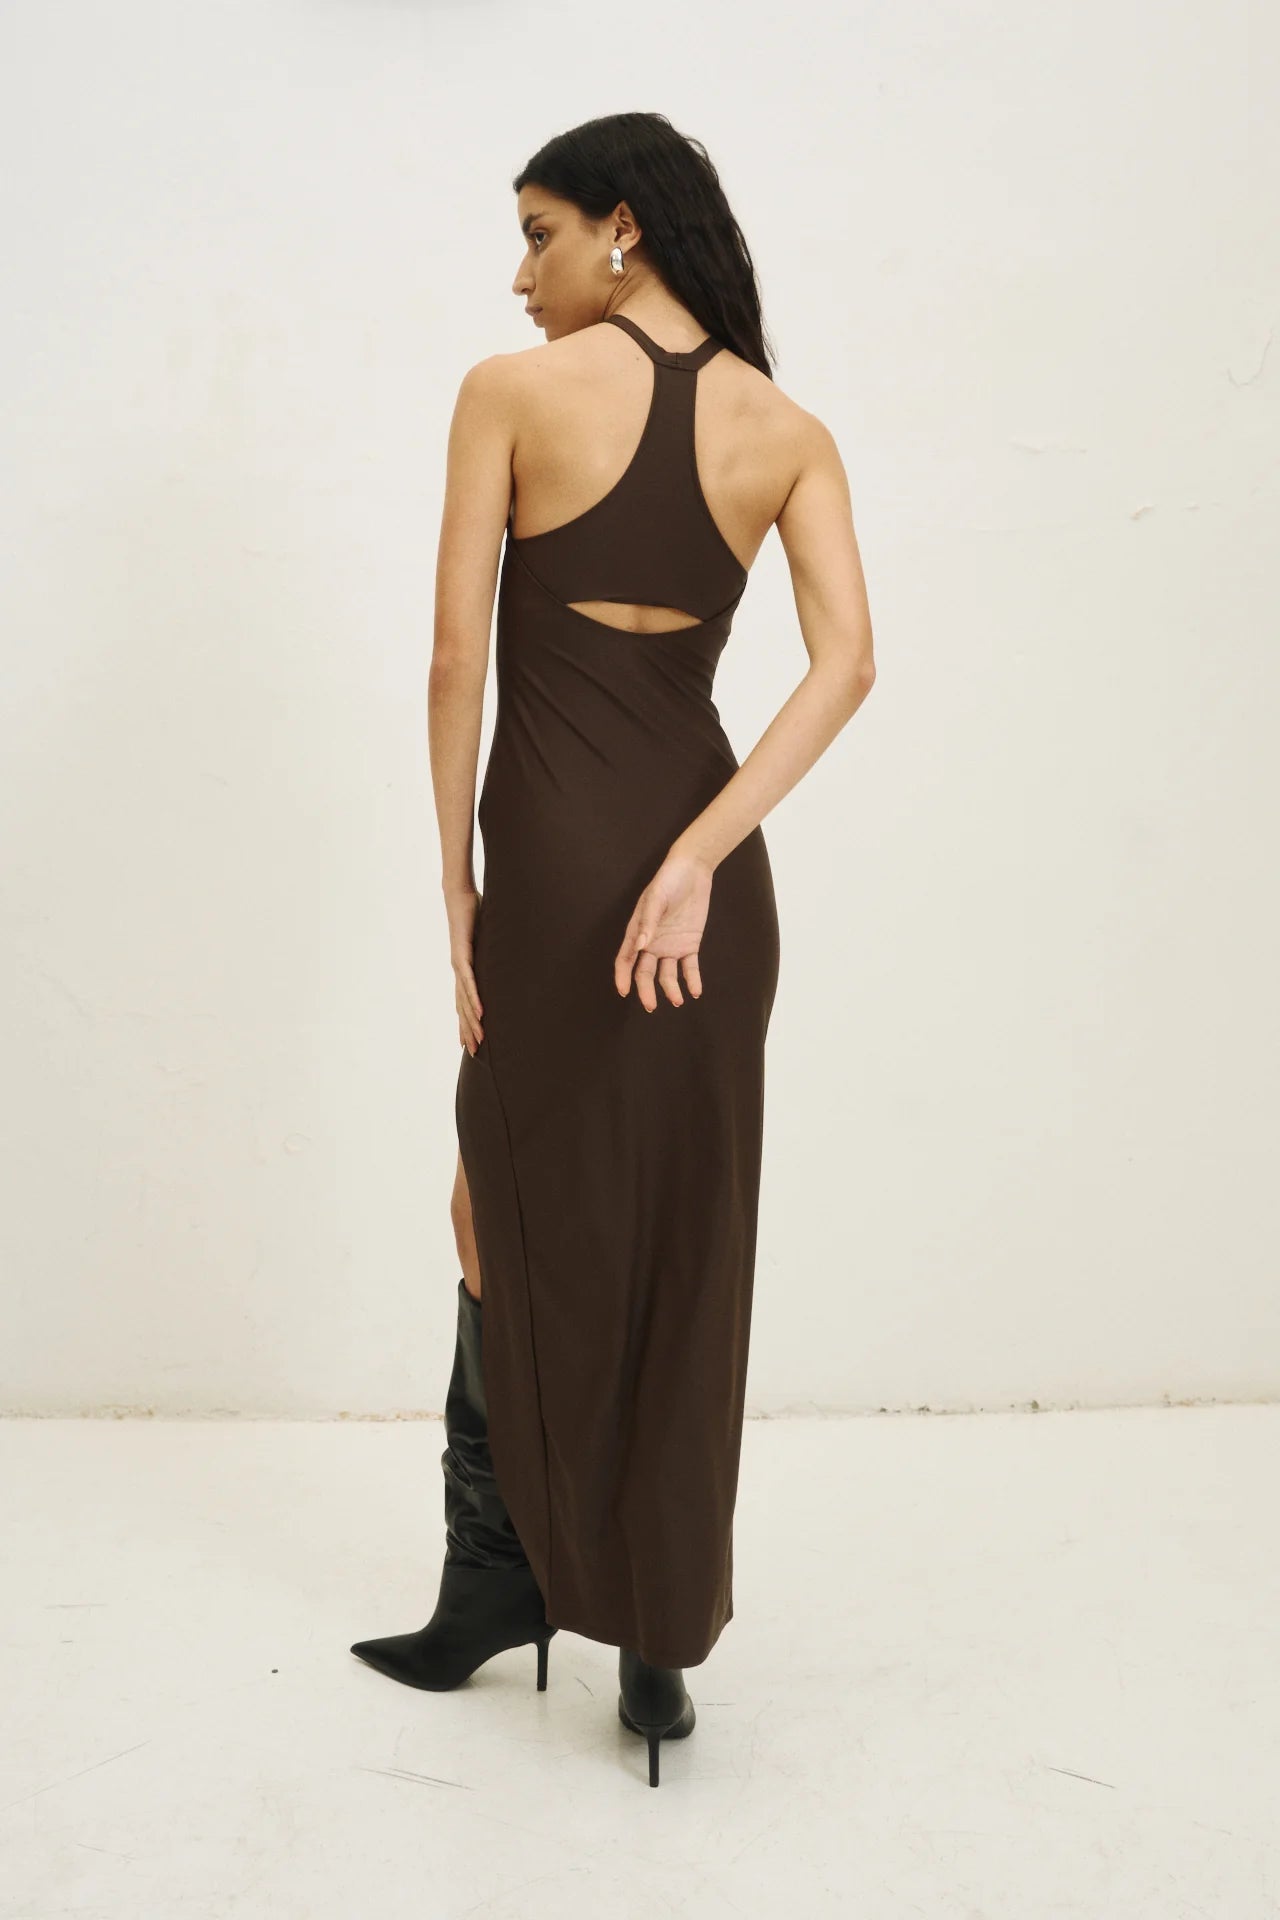 Olivia Halter Dress in Chocolate  (Limited Edition)